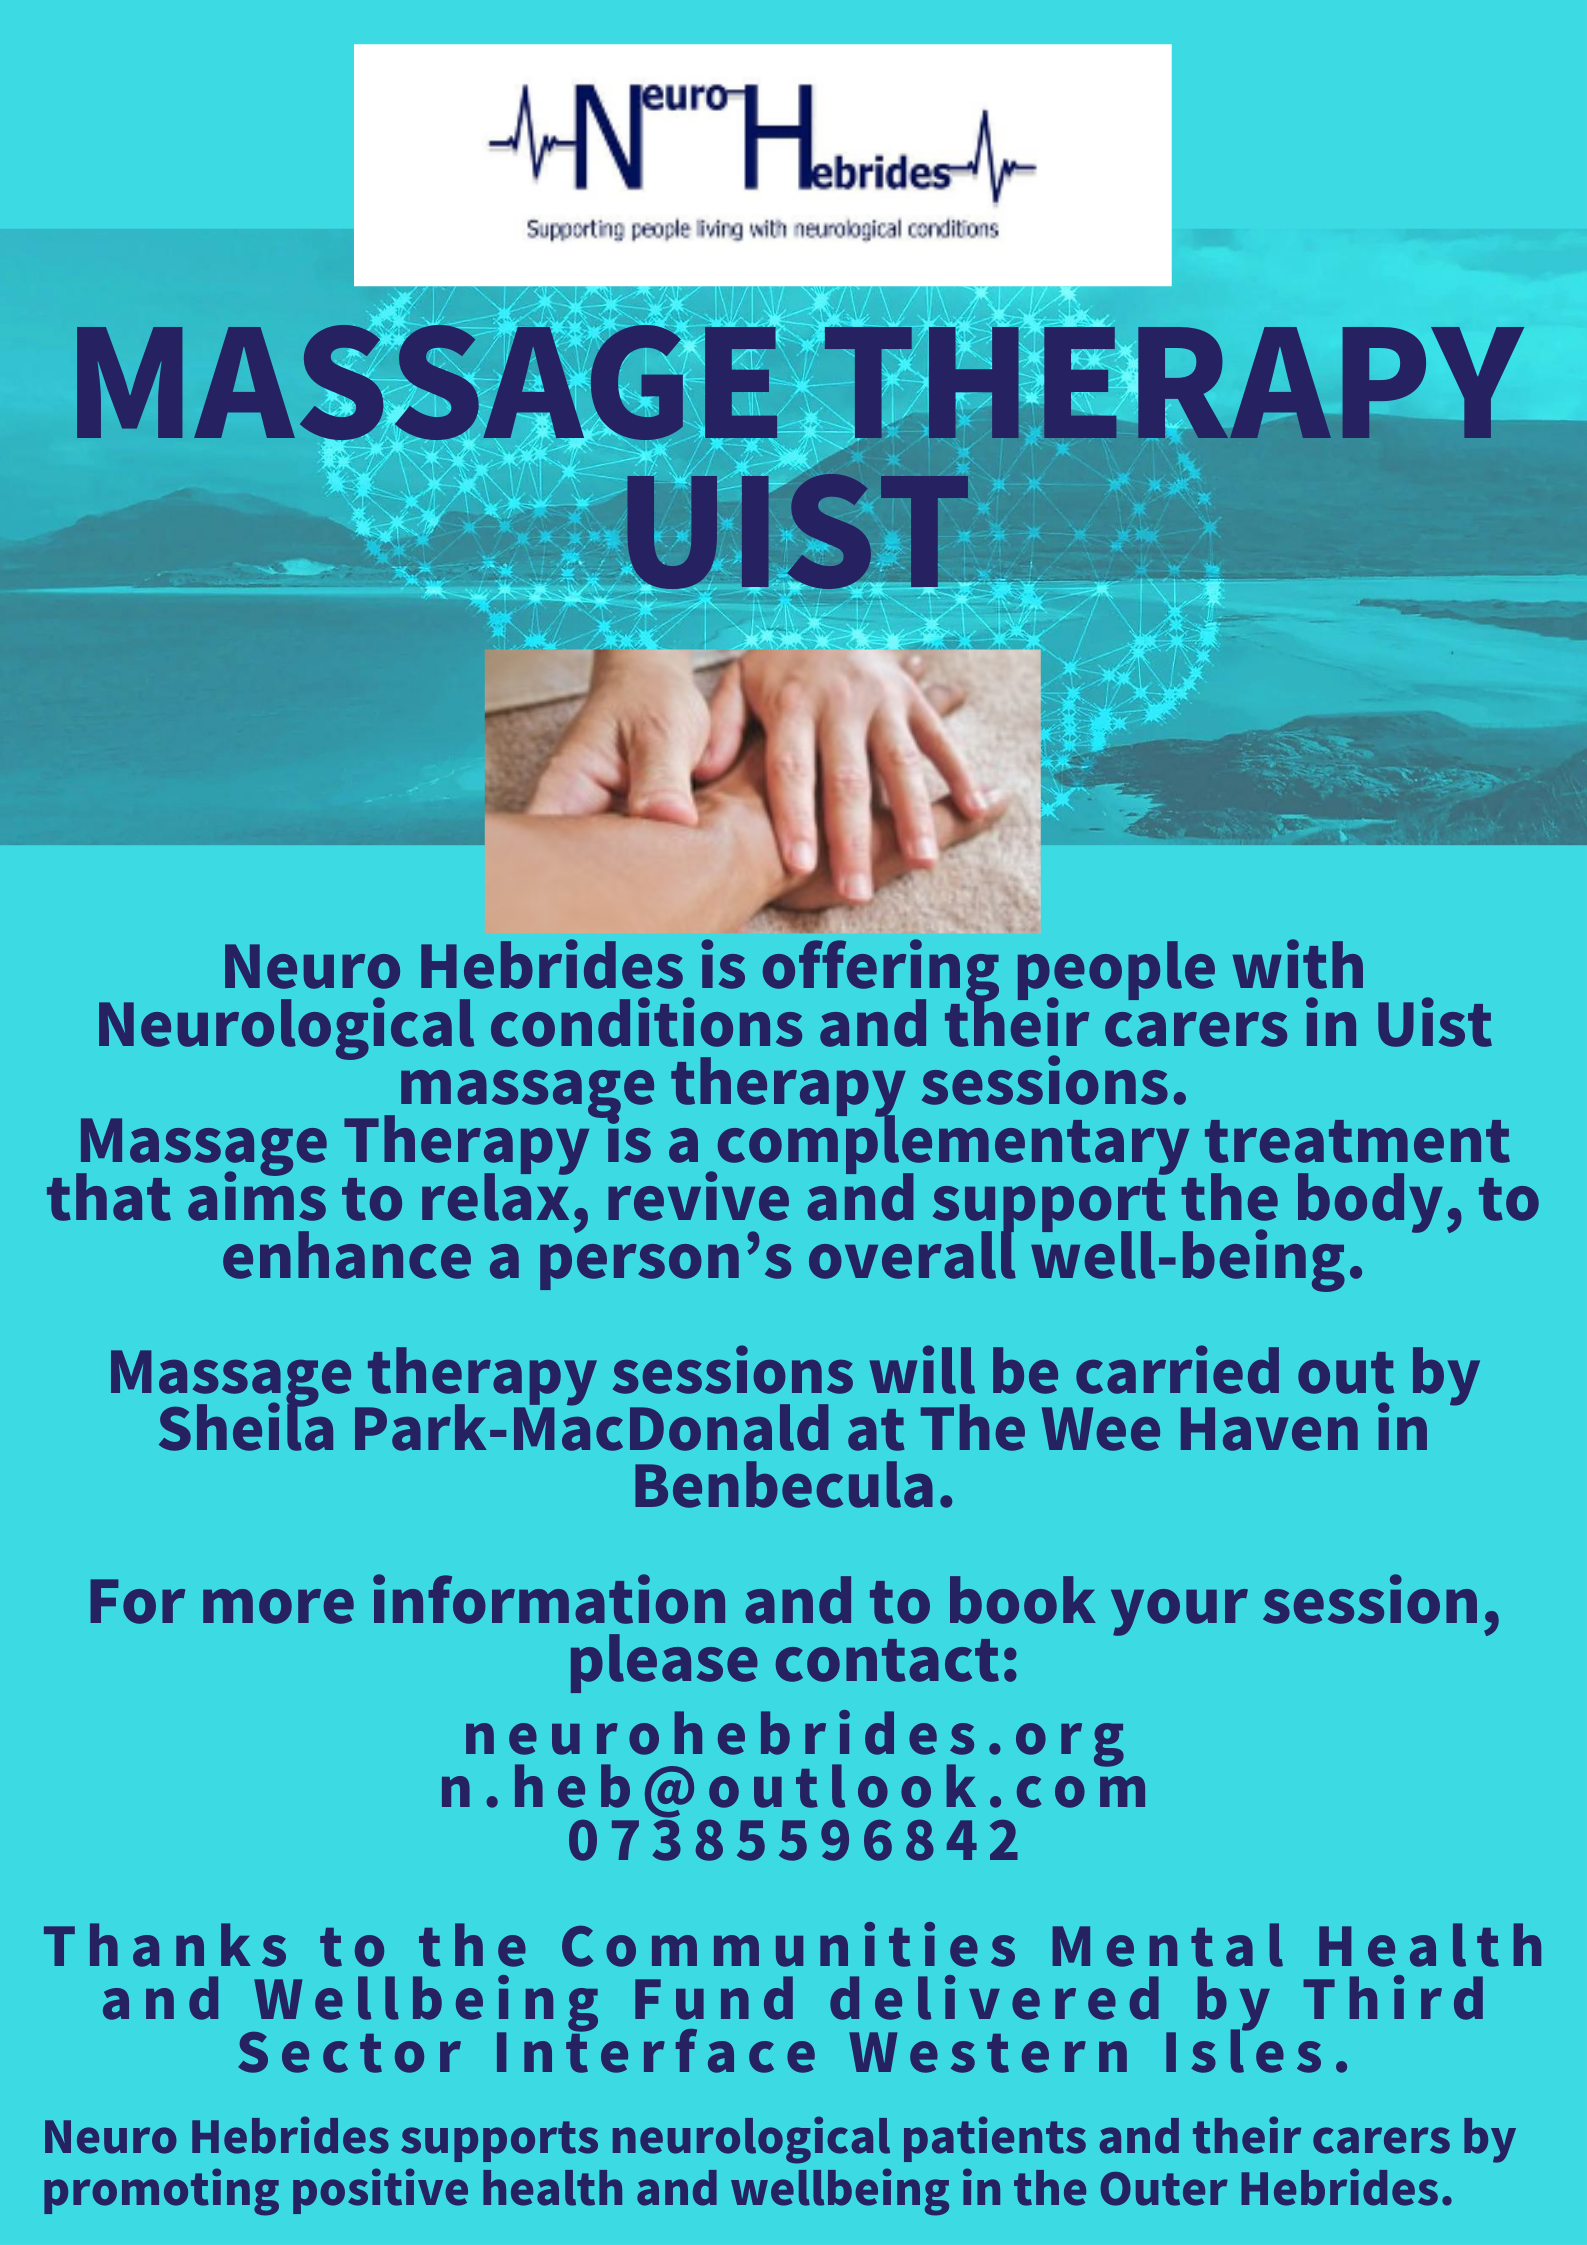 Leaflet promoting massage therapy sessions for people with neurological conditions.